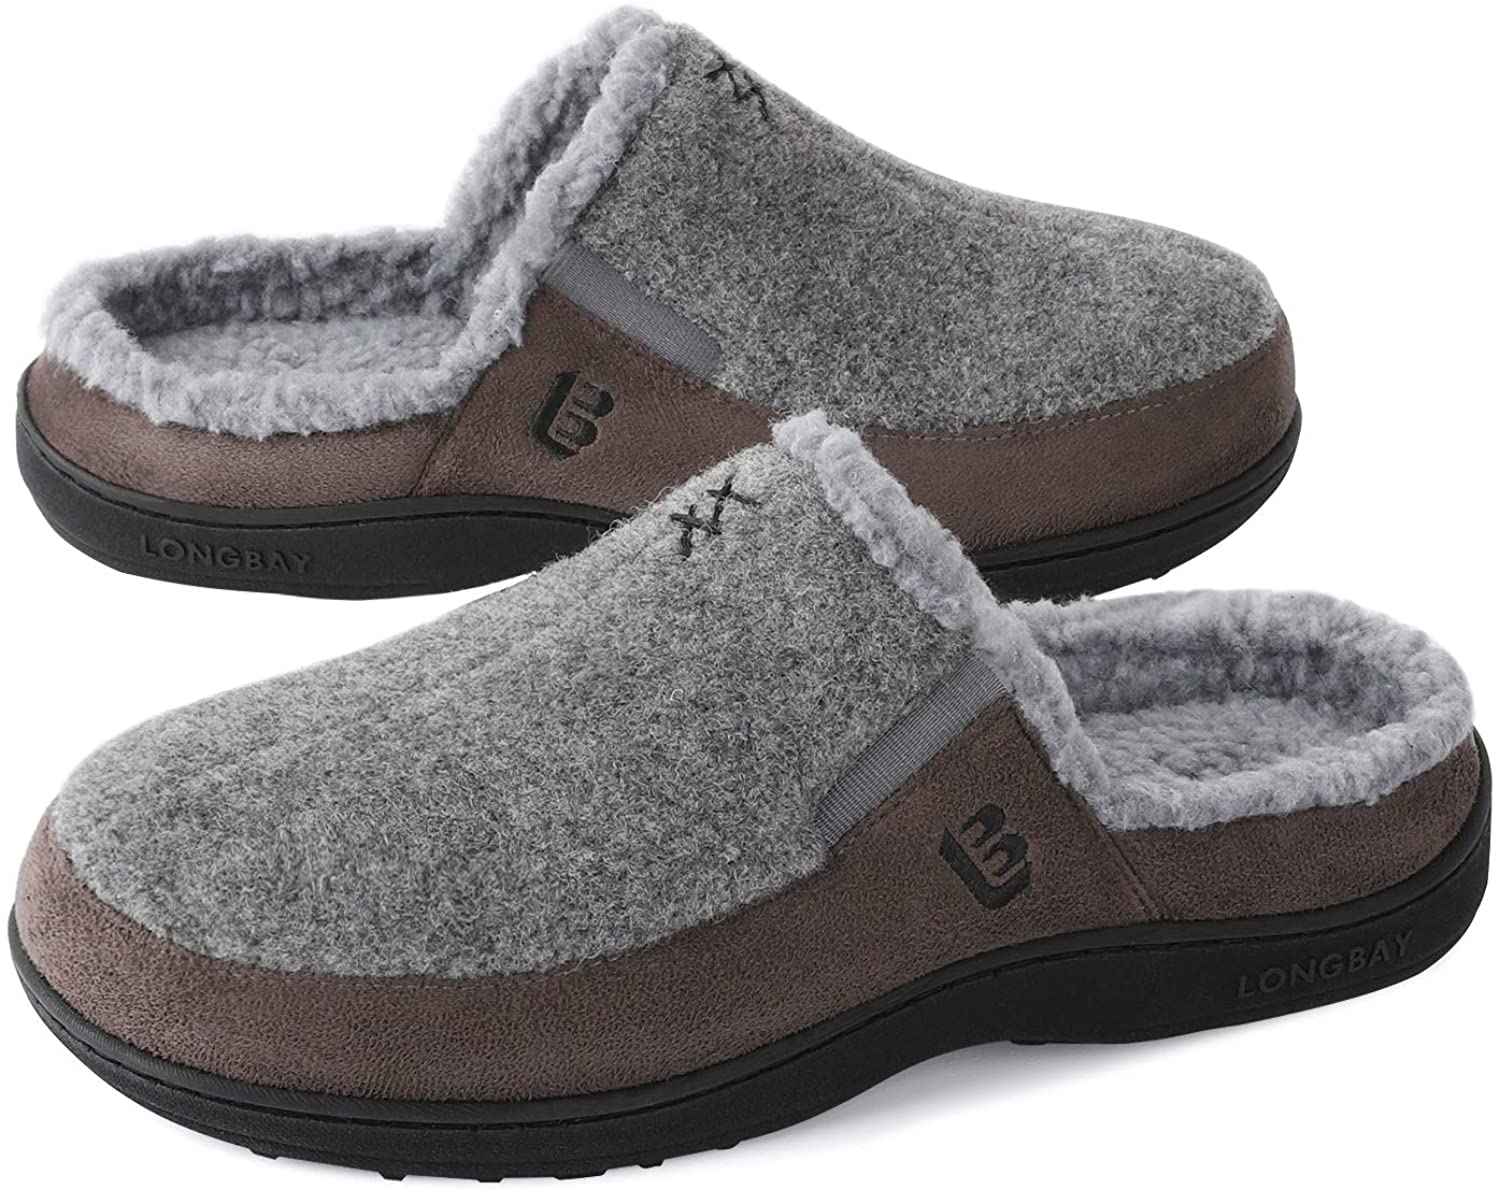 LongBay Mens Fuzzy Warm Slippers Memory Foam Indoor Outdoor House Shoes